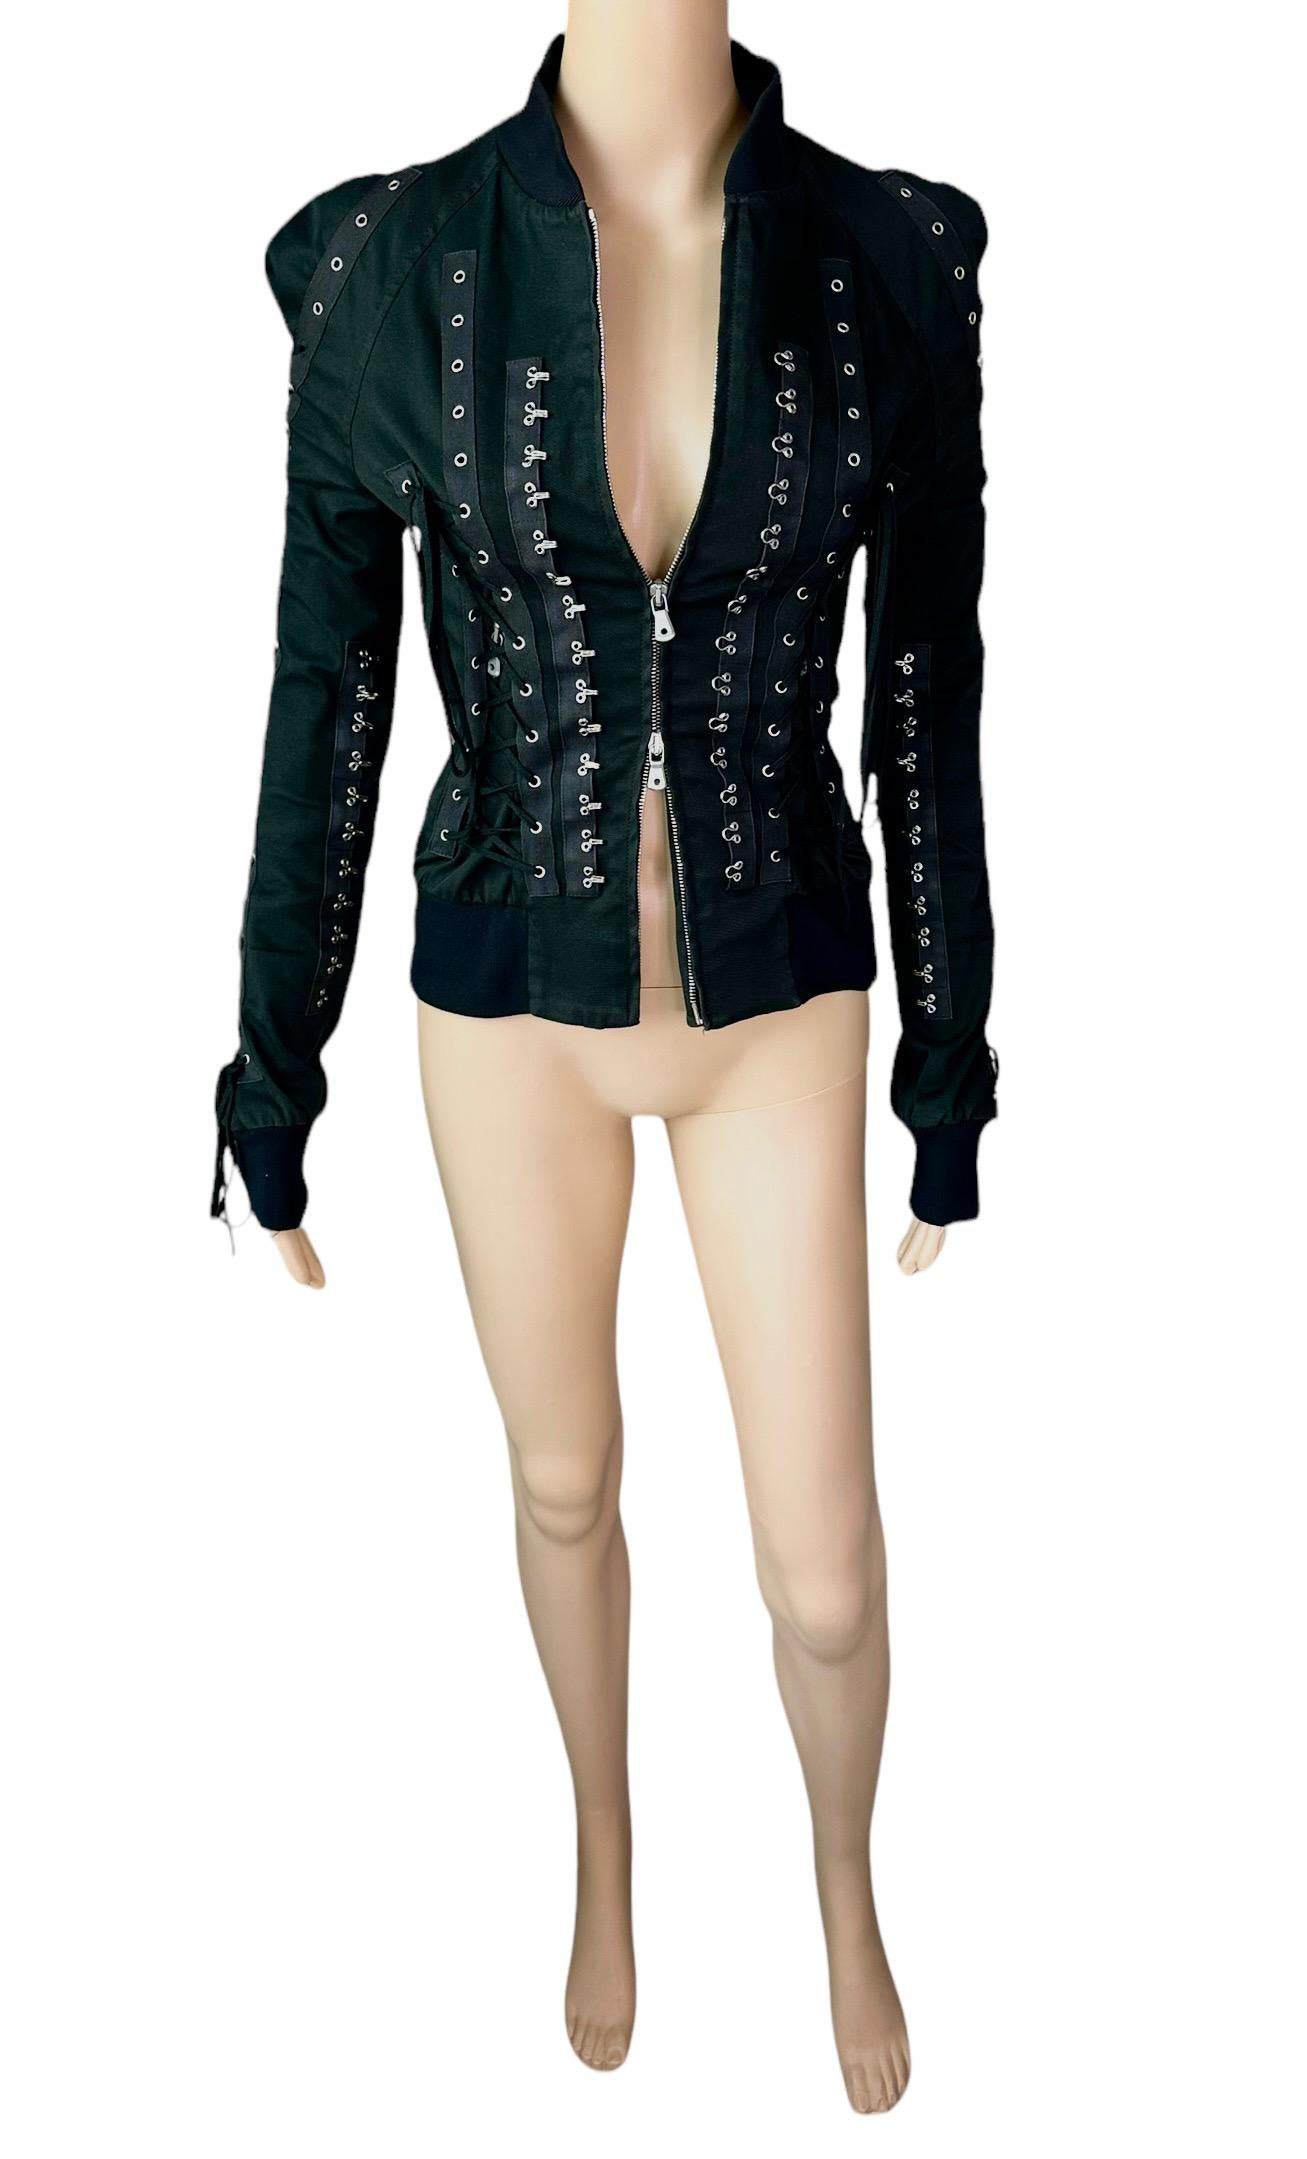 Dolce & Gabbana F/W 2003 Corset Lace Up Hook and Eye Black Top Jacket For Sale 4